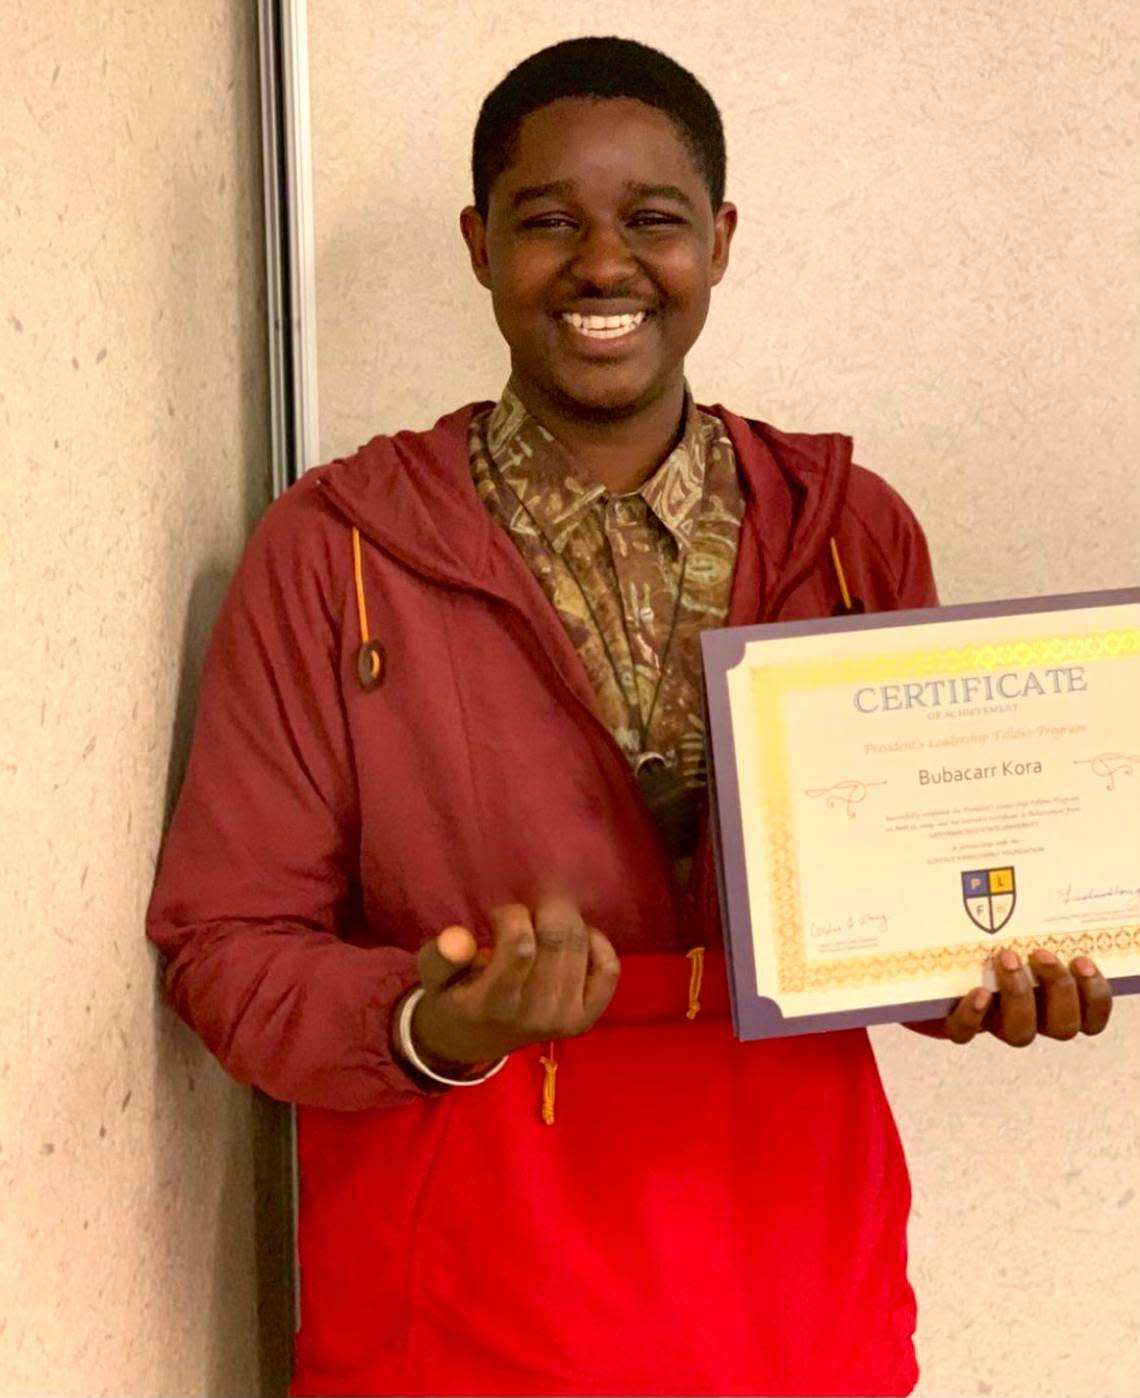 Bubacarr Kora, who studied Africana studies at San Francisco State University, poses for a picture. He died during a high-speed vehicle pursuit on Highway 101 in San Luis Obispo County on July 4, 2022.